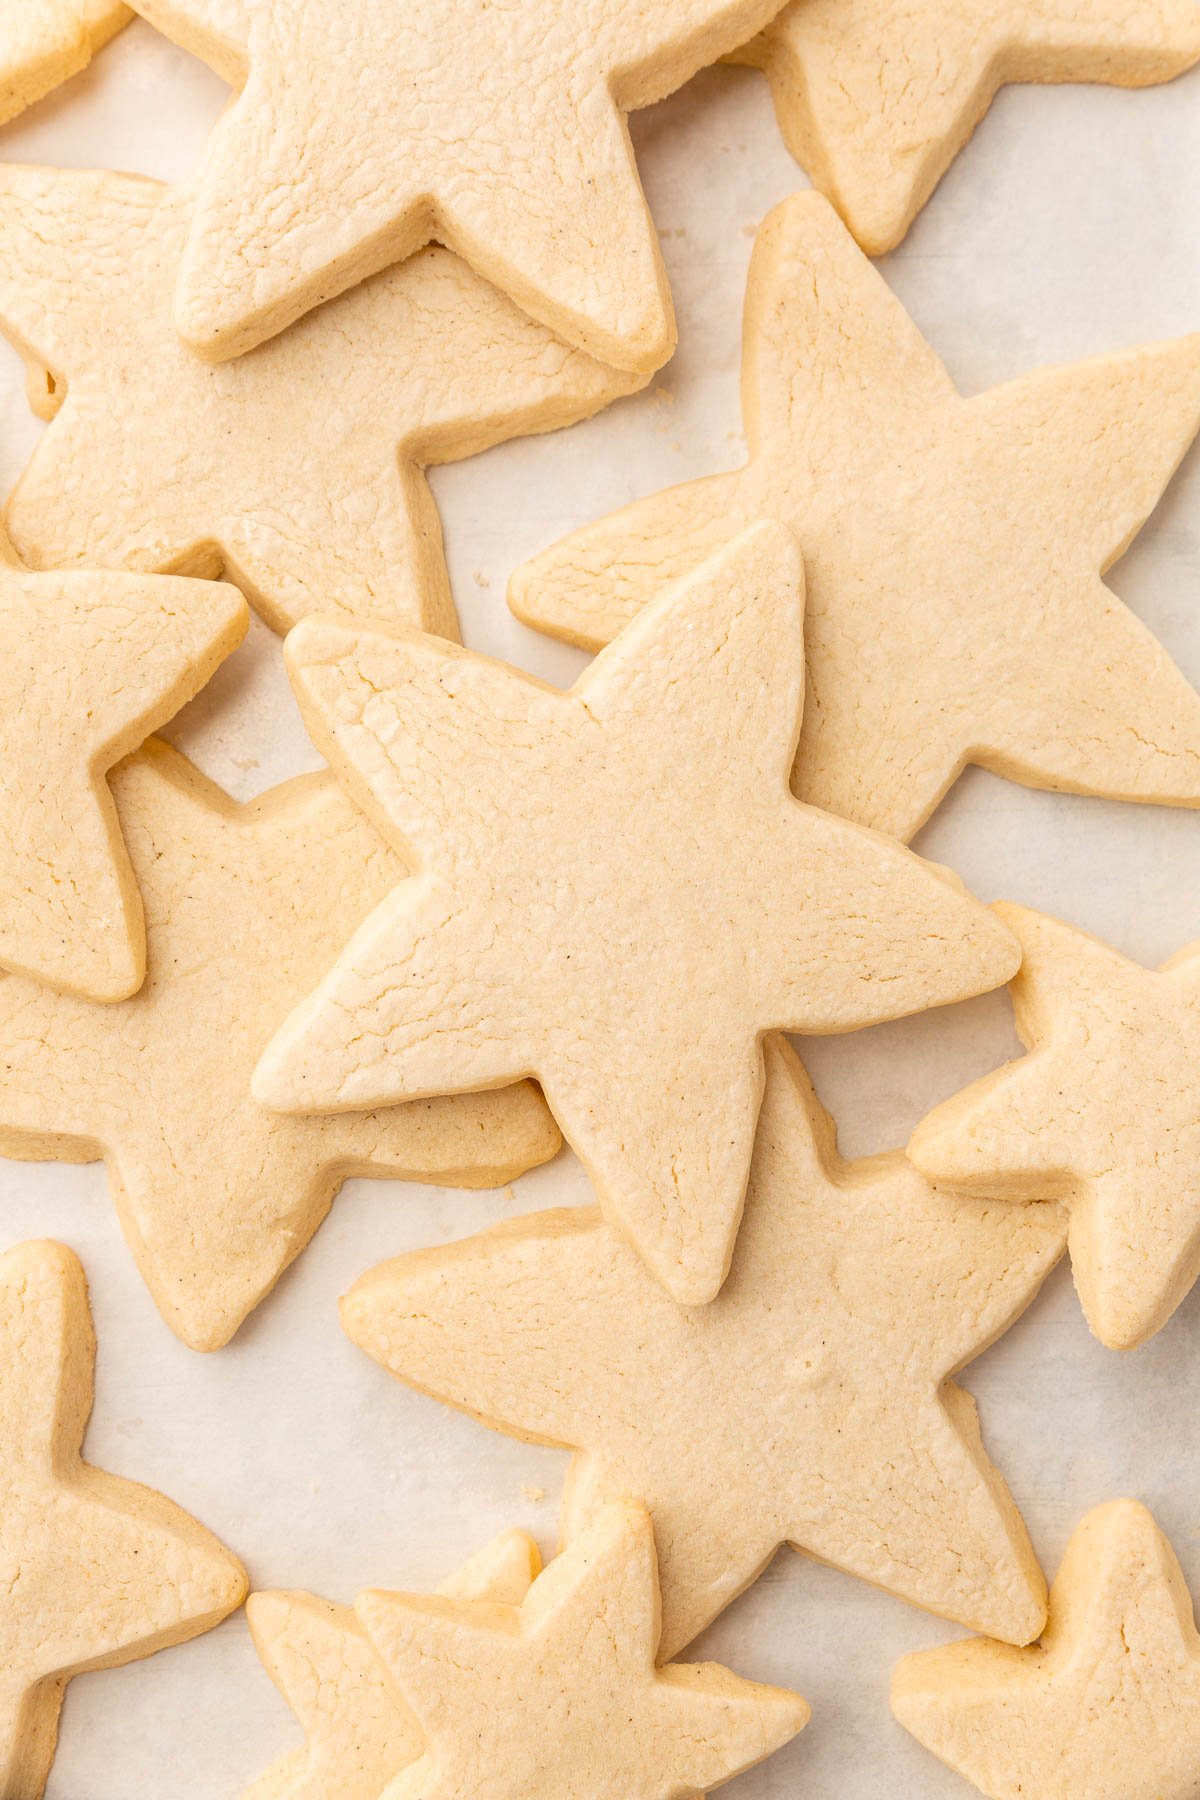 Gluten-free sugar cookies cut into the shape of stars stacked on top of one another.